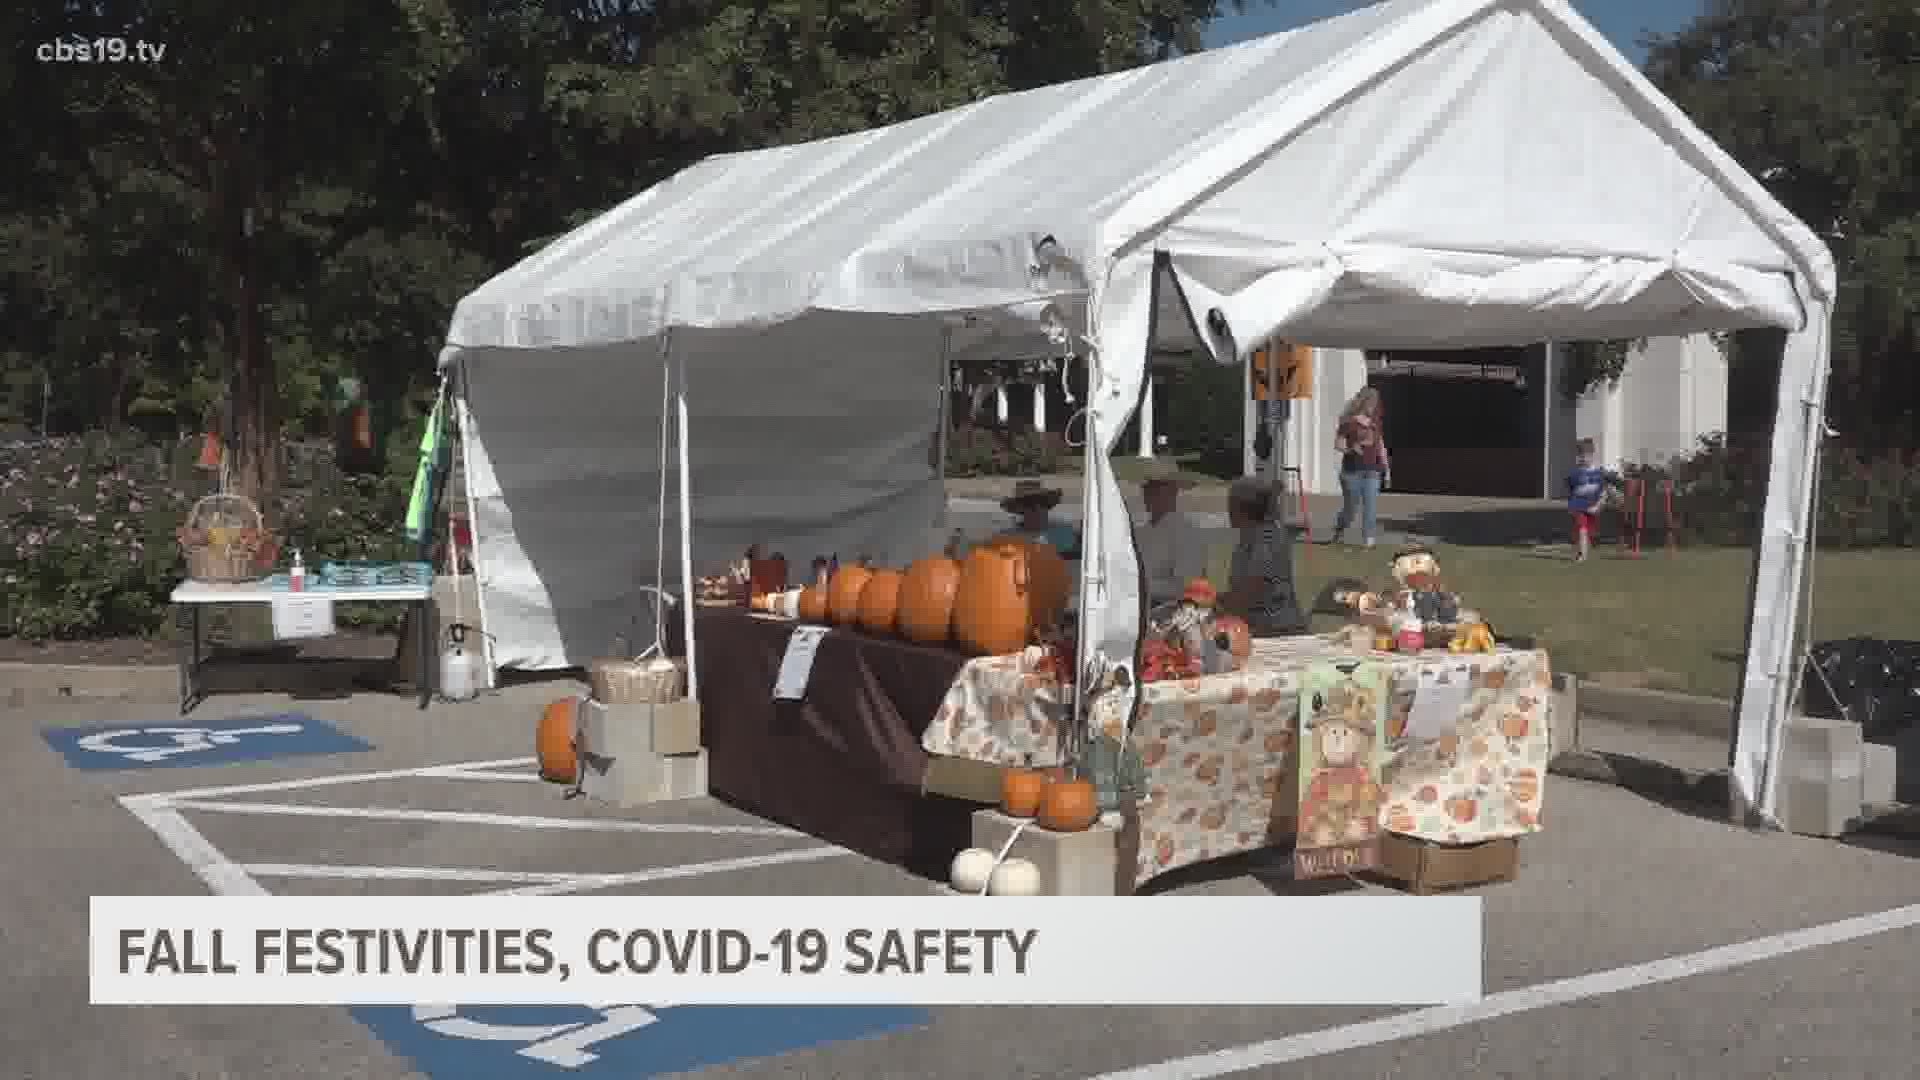 Safety measures have been put in place to enjoy fall activities during the coronavirus pandemic.